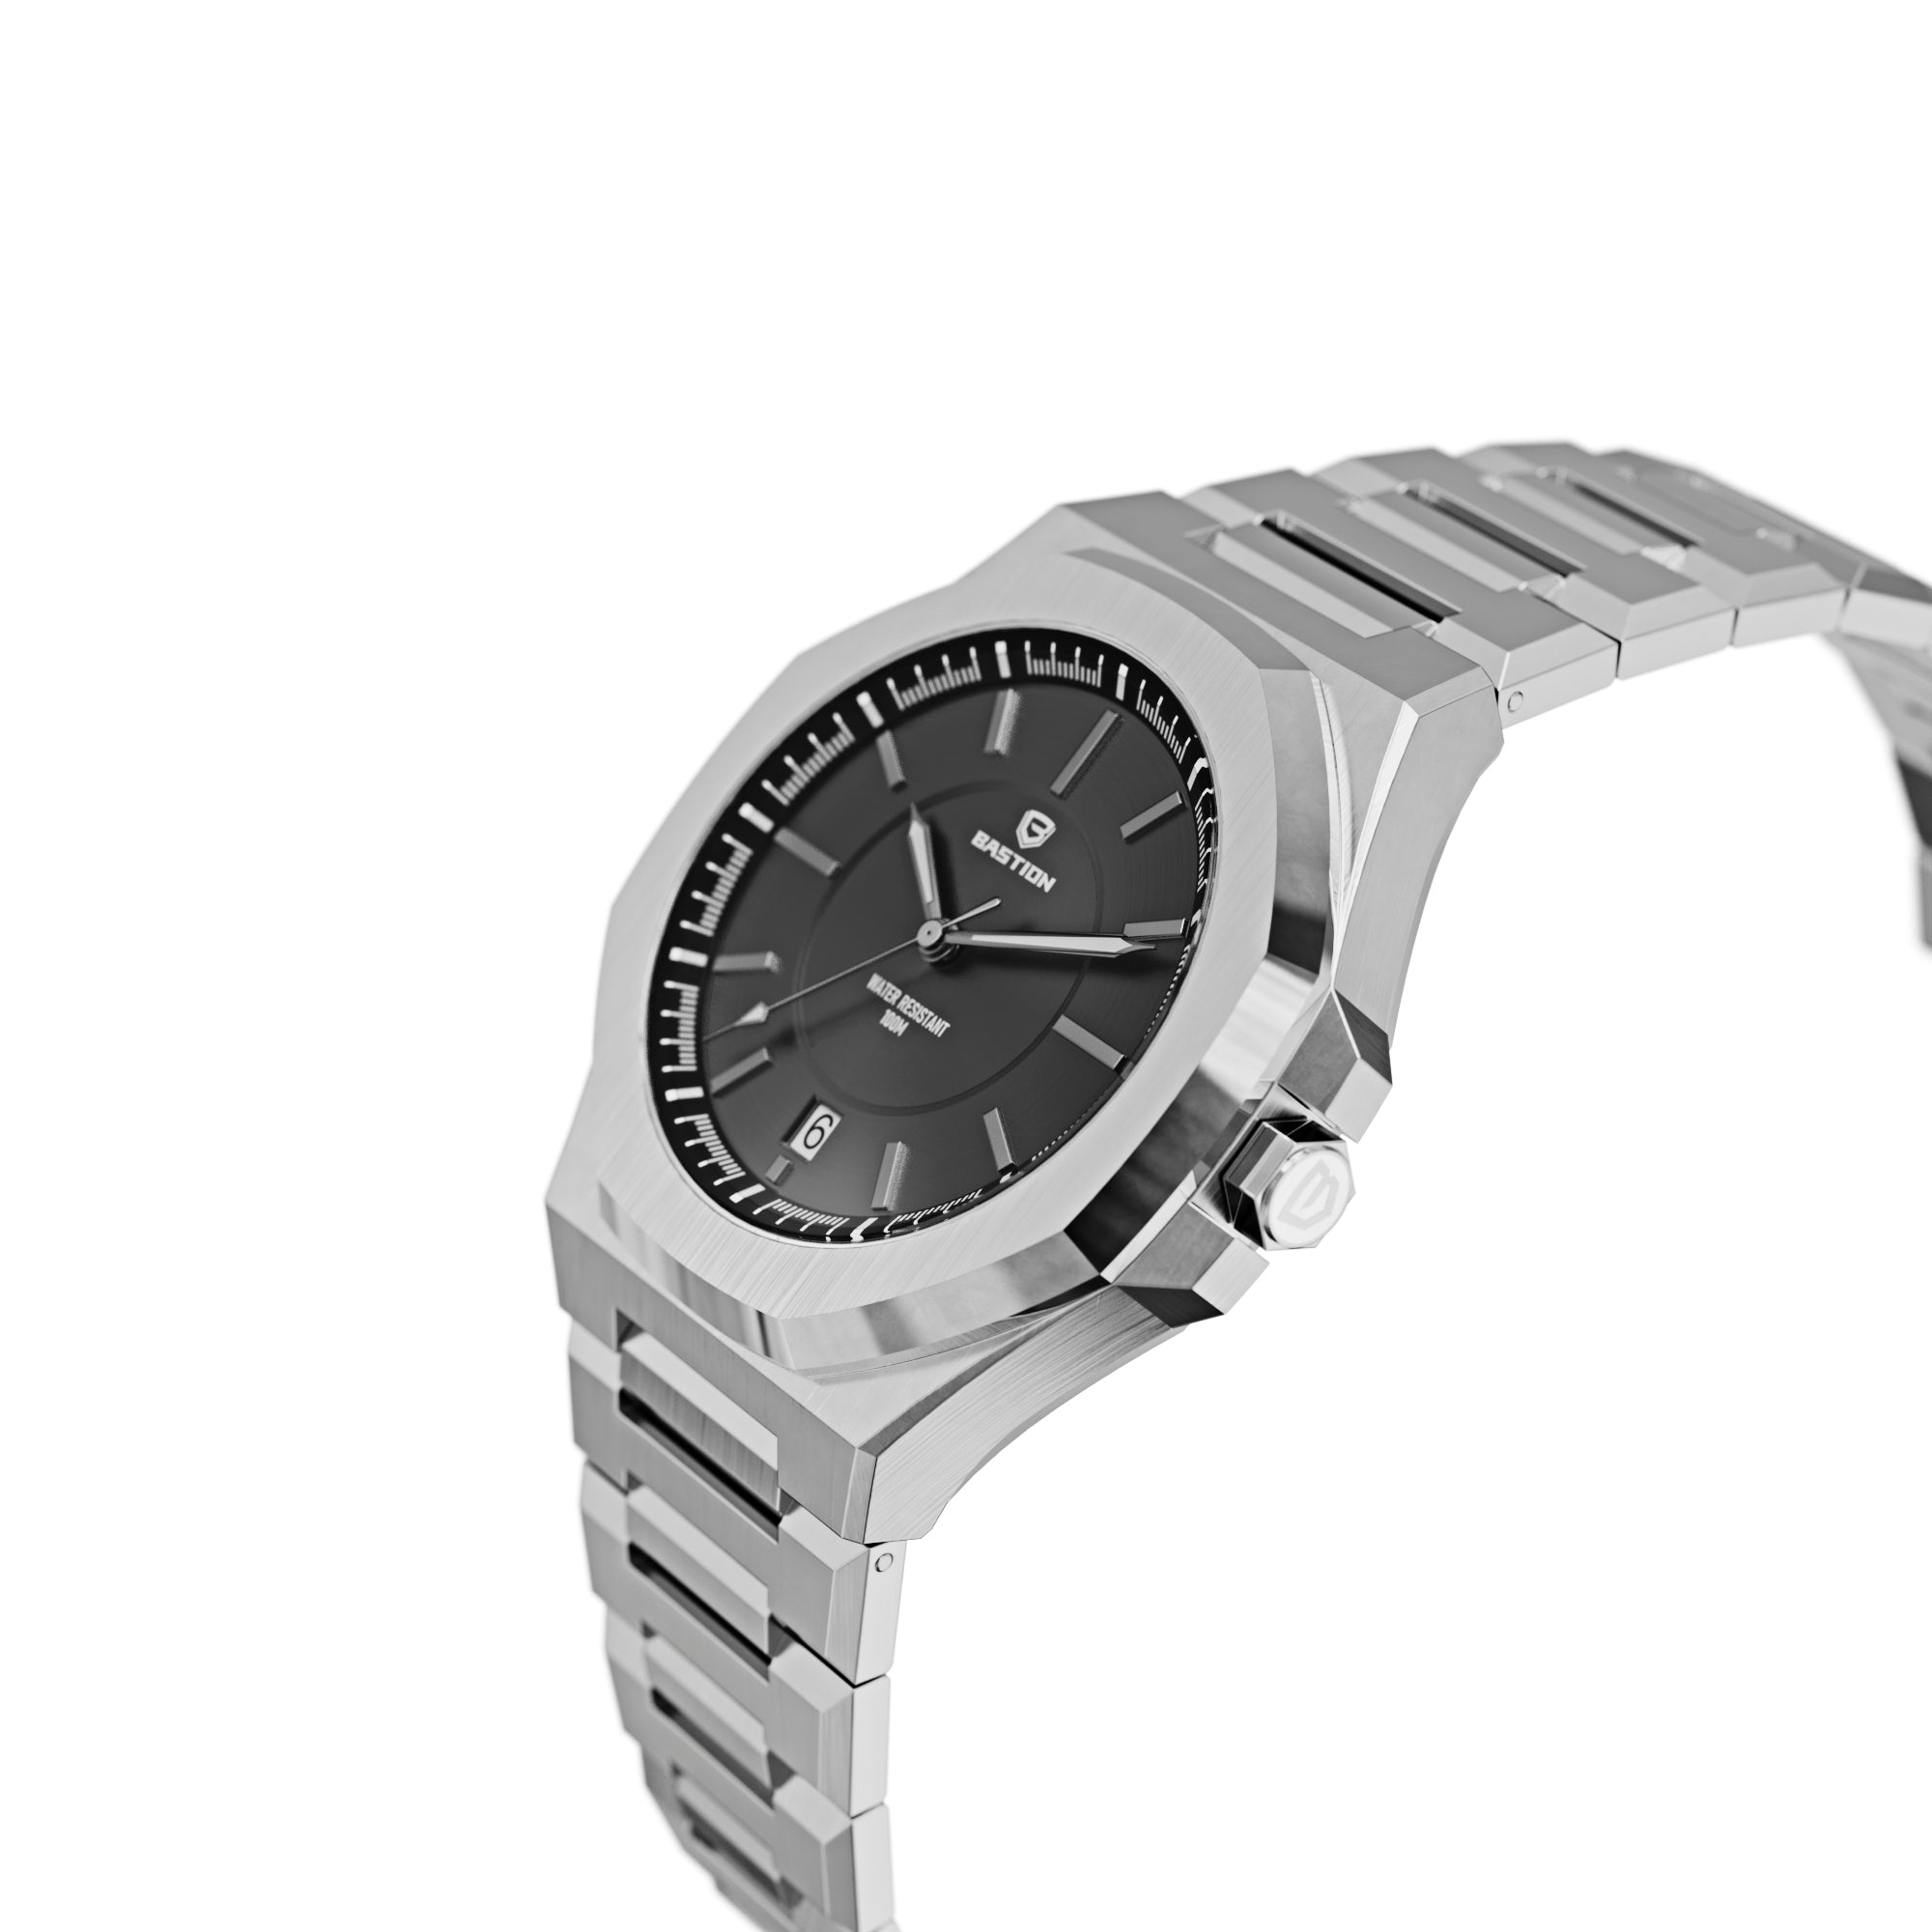 NOMAD - STAINLESS STEEL AUTOMATIC 42MM WATCH, WATERPROOF 10ATM (100m)